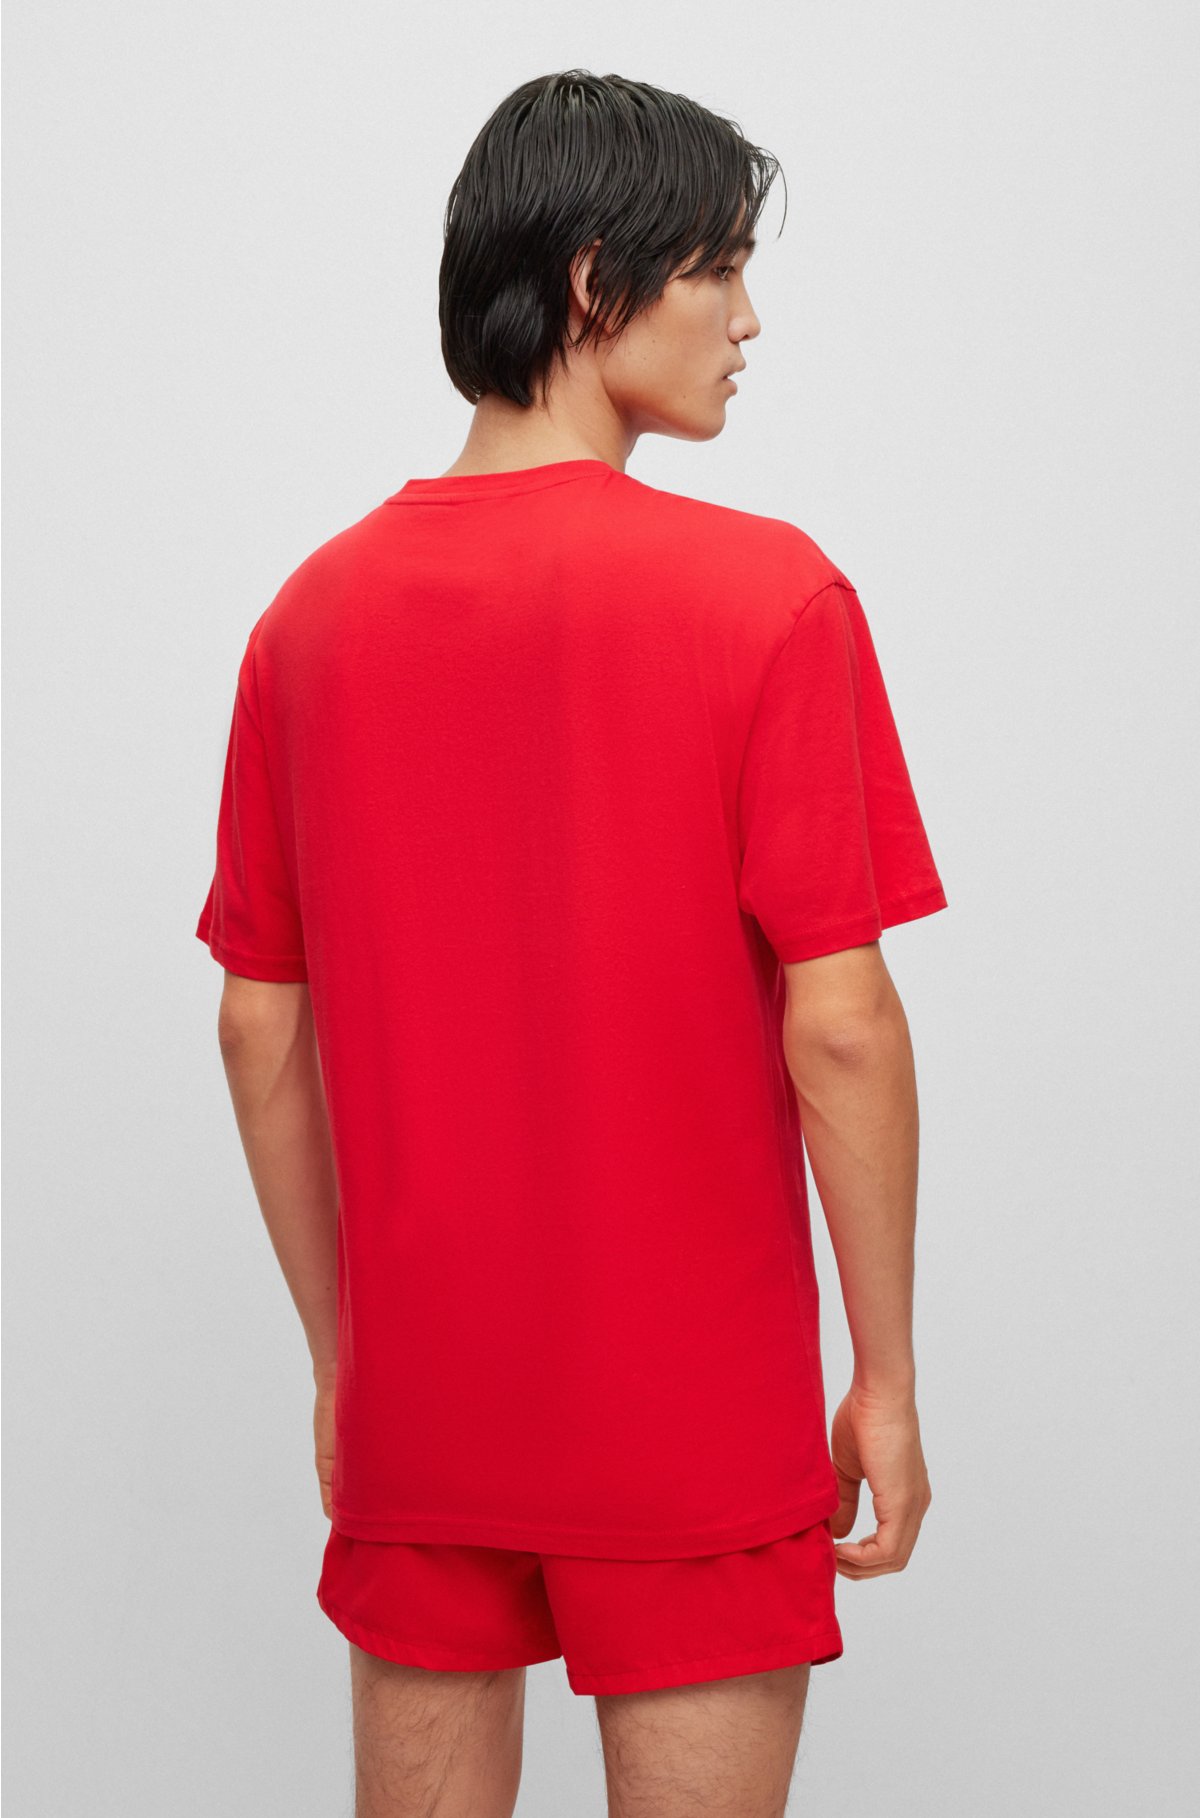 Cotton-jersey T-shirt with SPF 50+ UV protection, Red